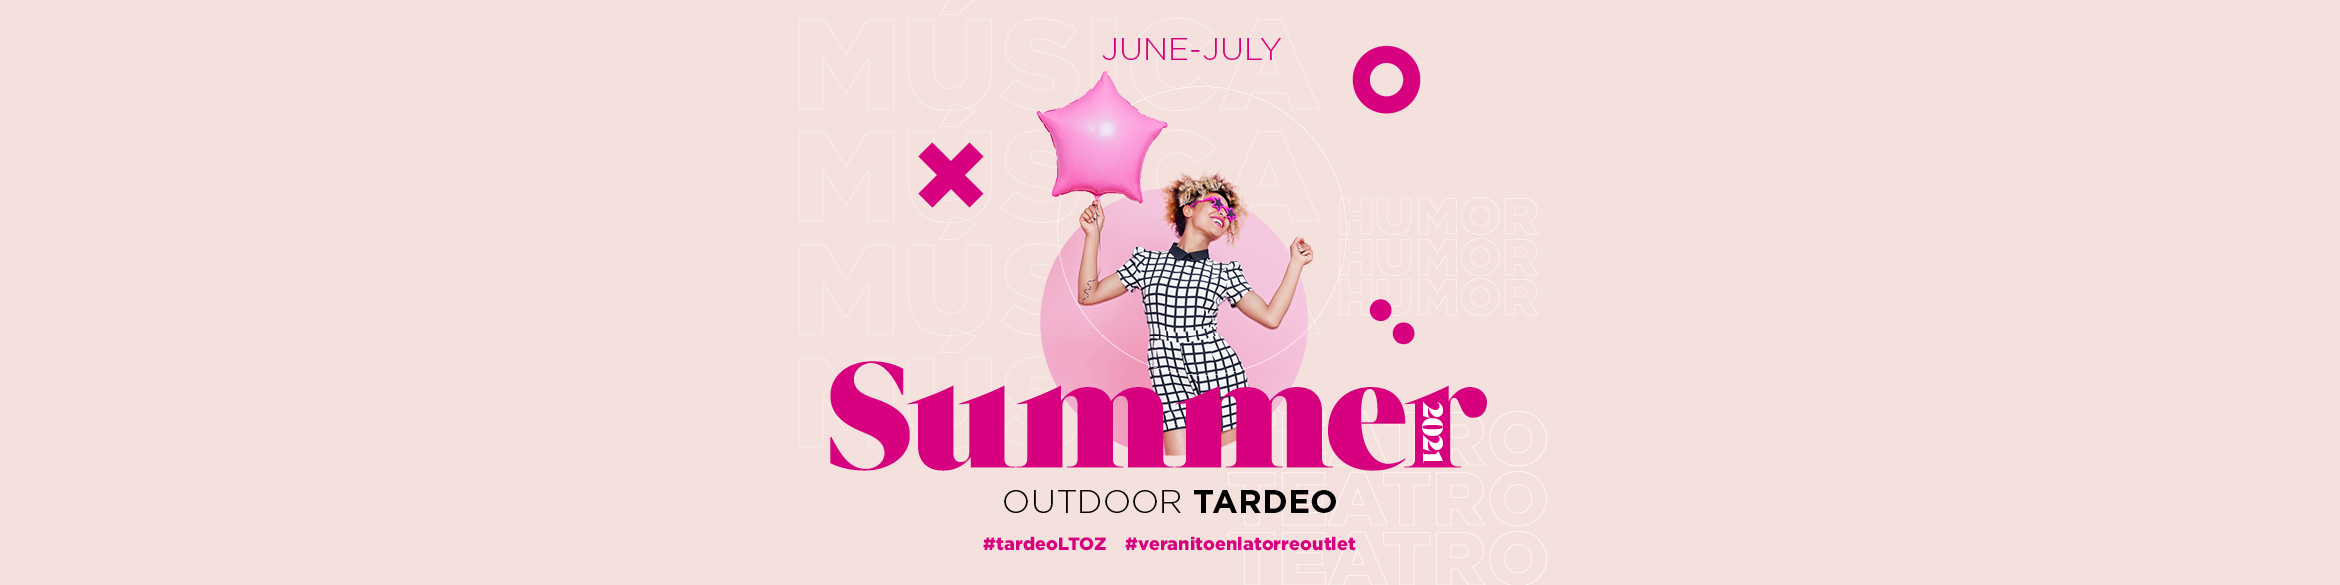 OUTDOOR "TARDEO" AT LA TORRE OUTLET ZARAGOZA